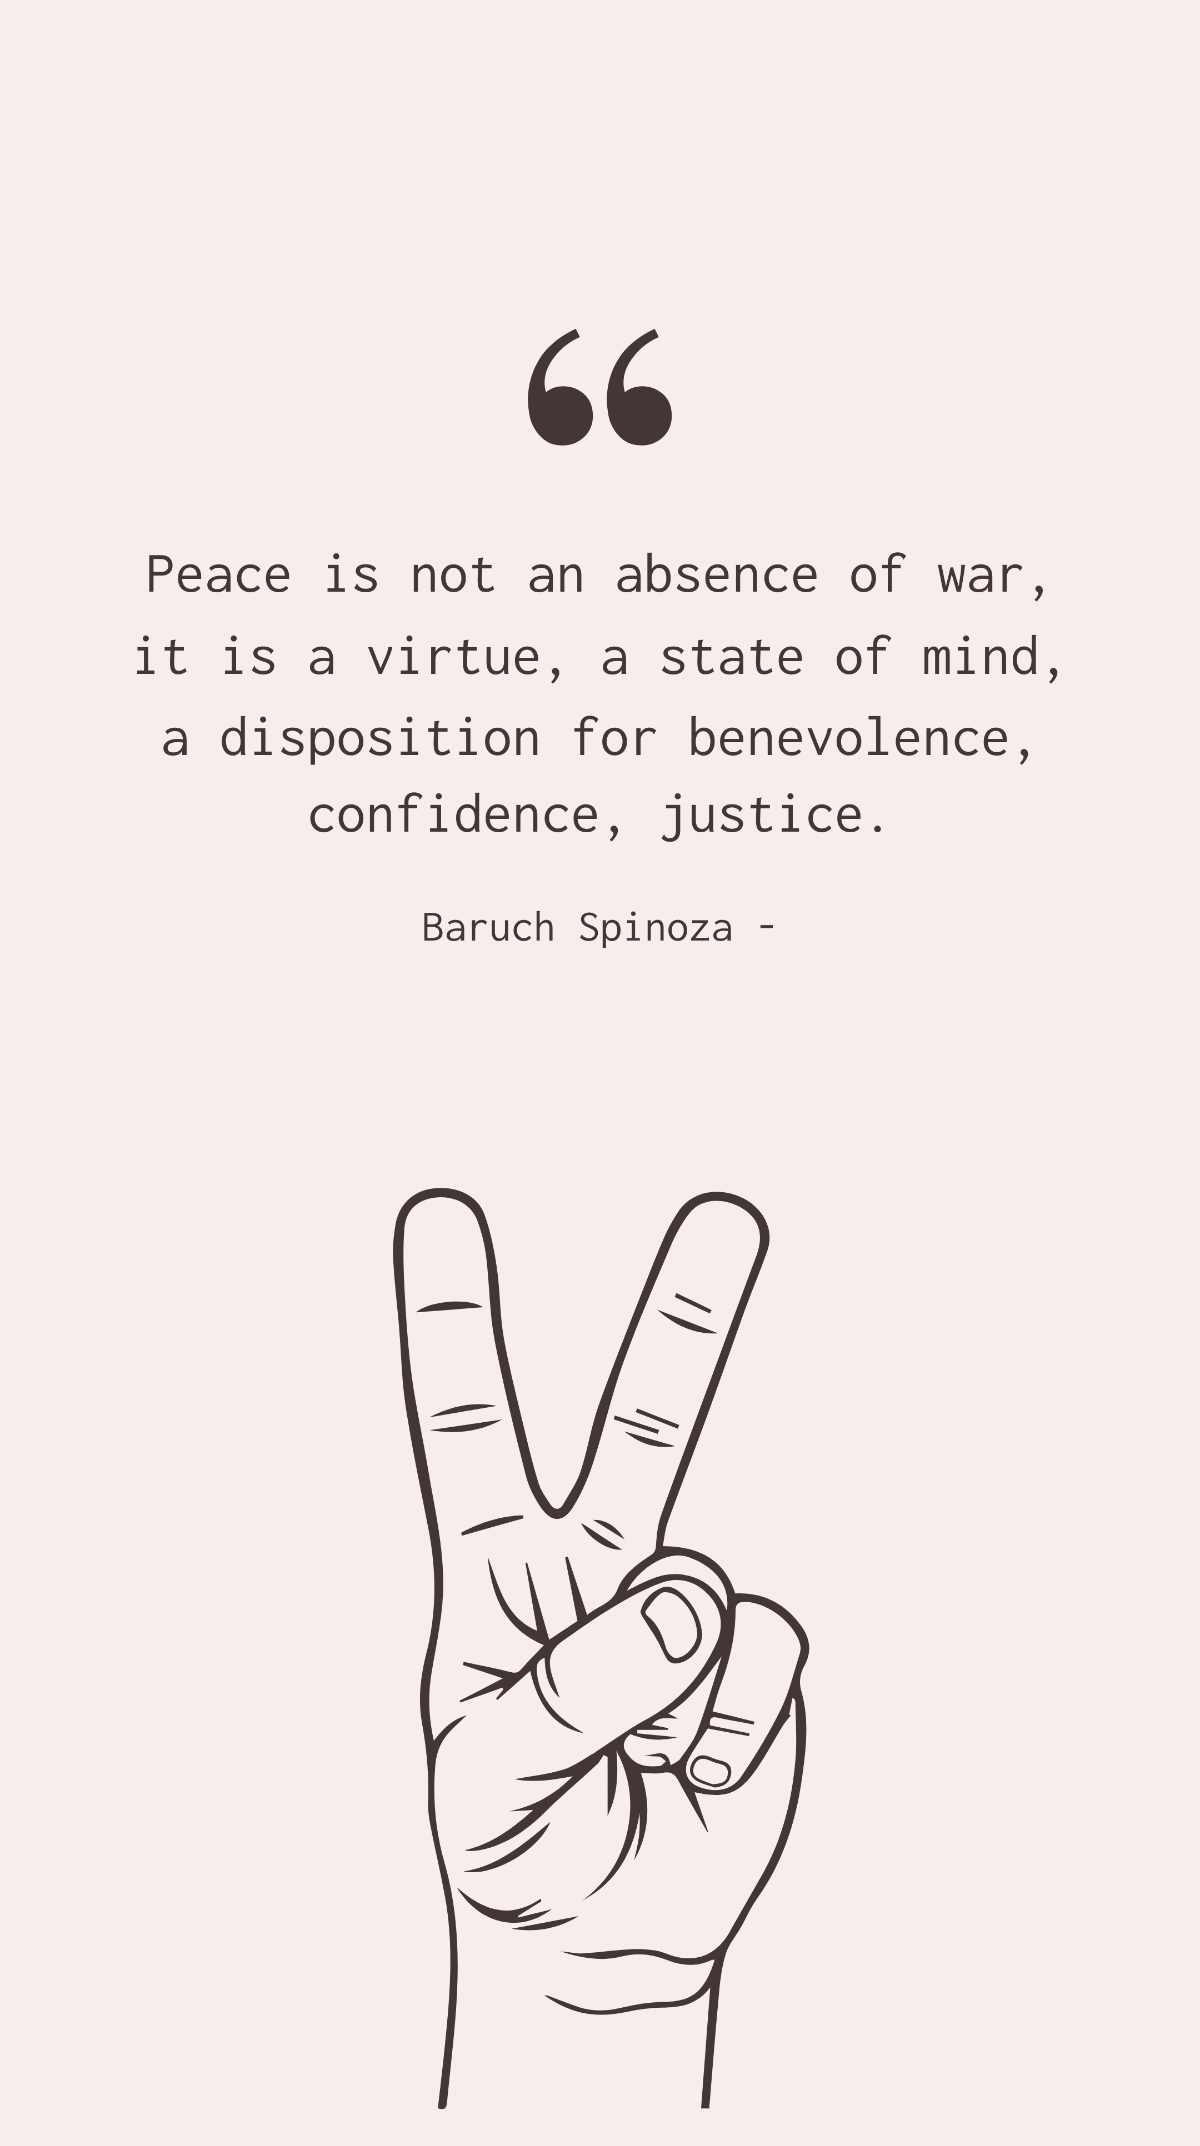 Free Baruch Spinoza - Peace is not an absence of war, it is a virtue, a state of mind, a disposition for benevolence, confidence, justice. Template